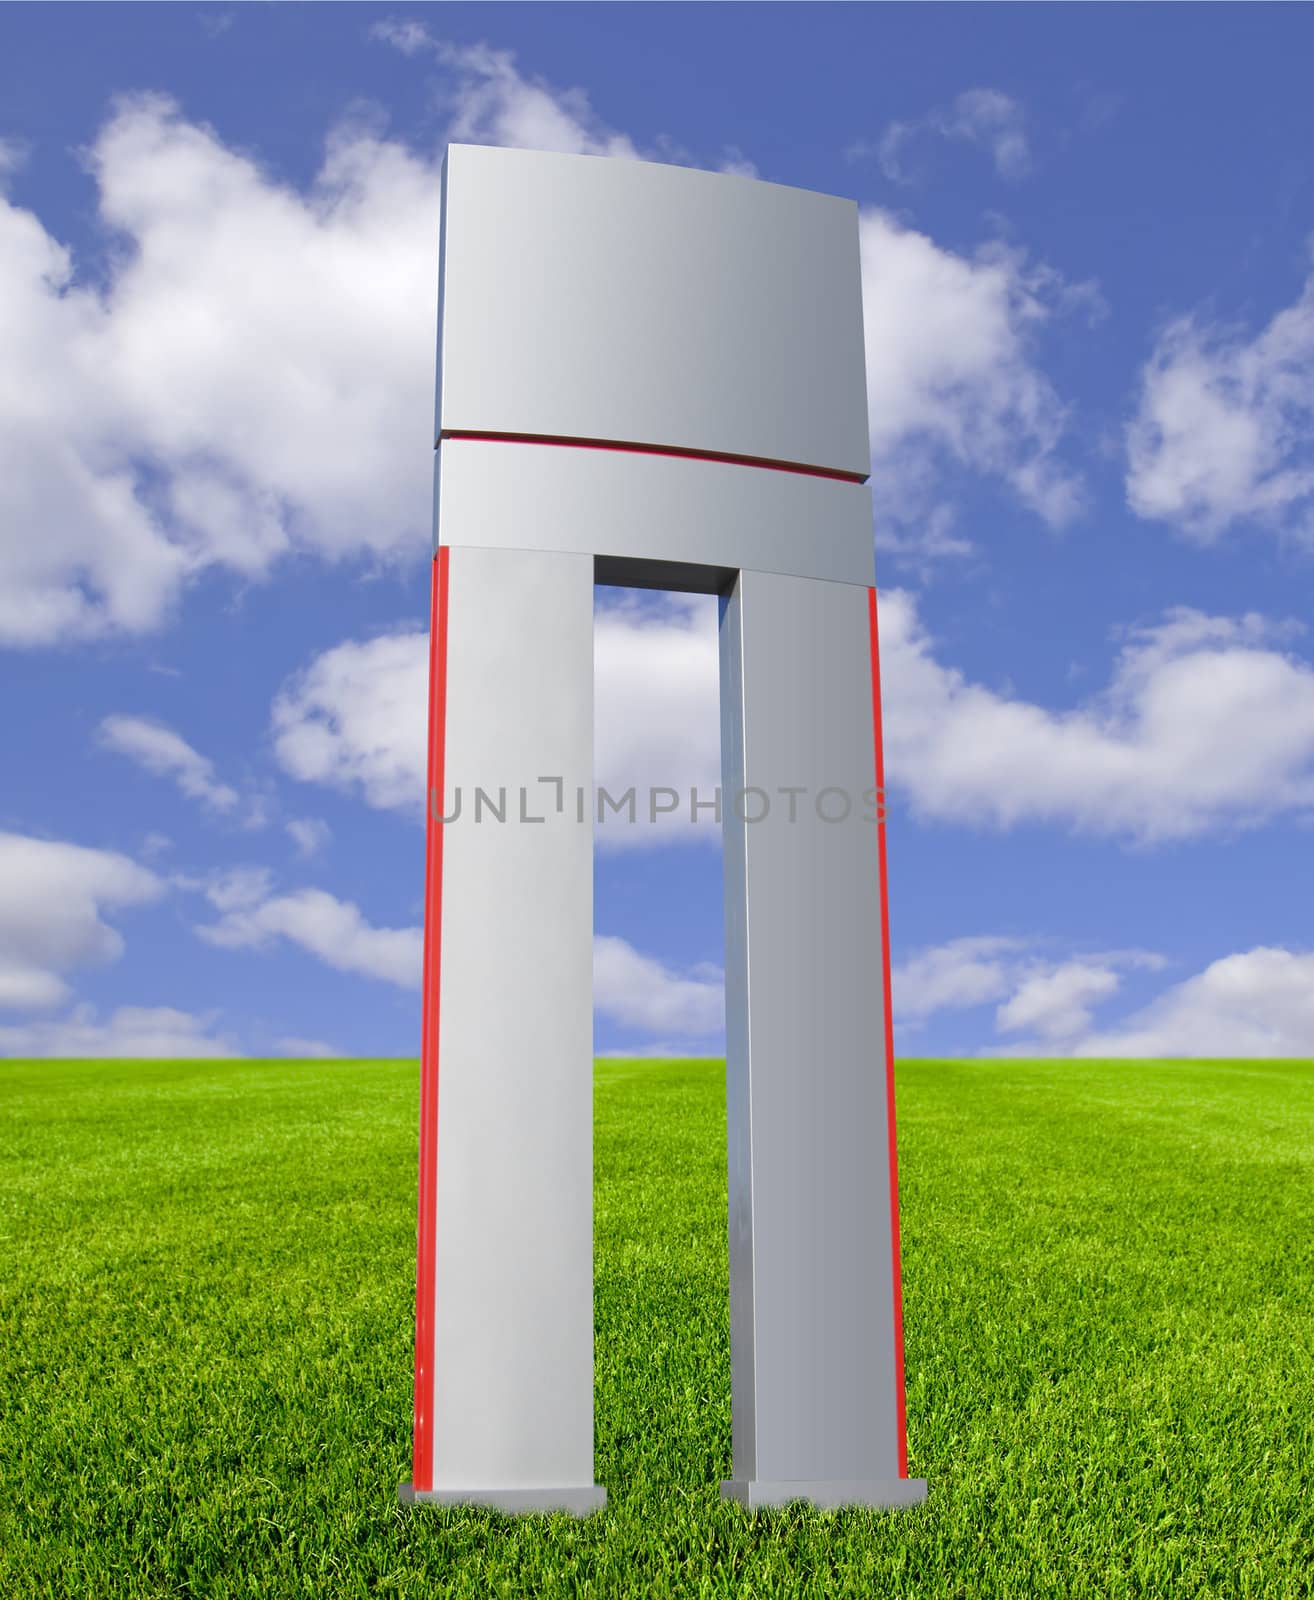 Blank signpost in brushed aluminum on lawn with blue sky and clouds, isolated with clipping path